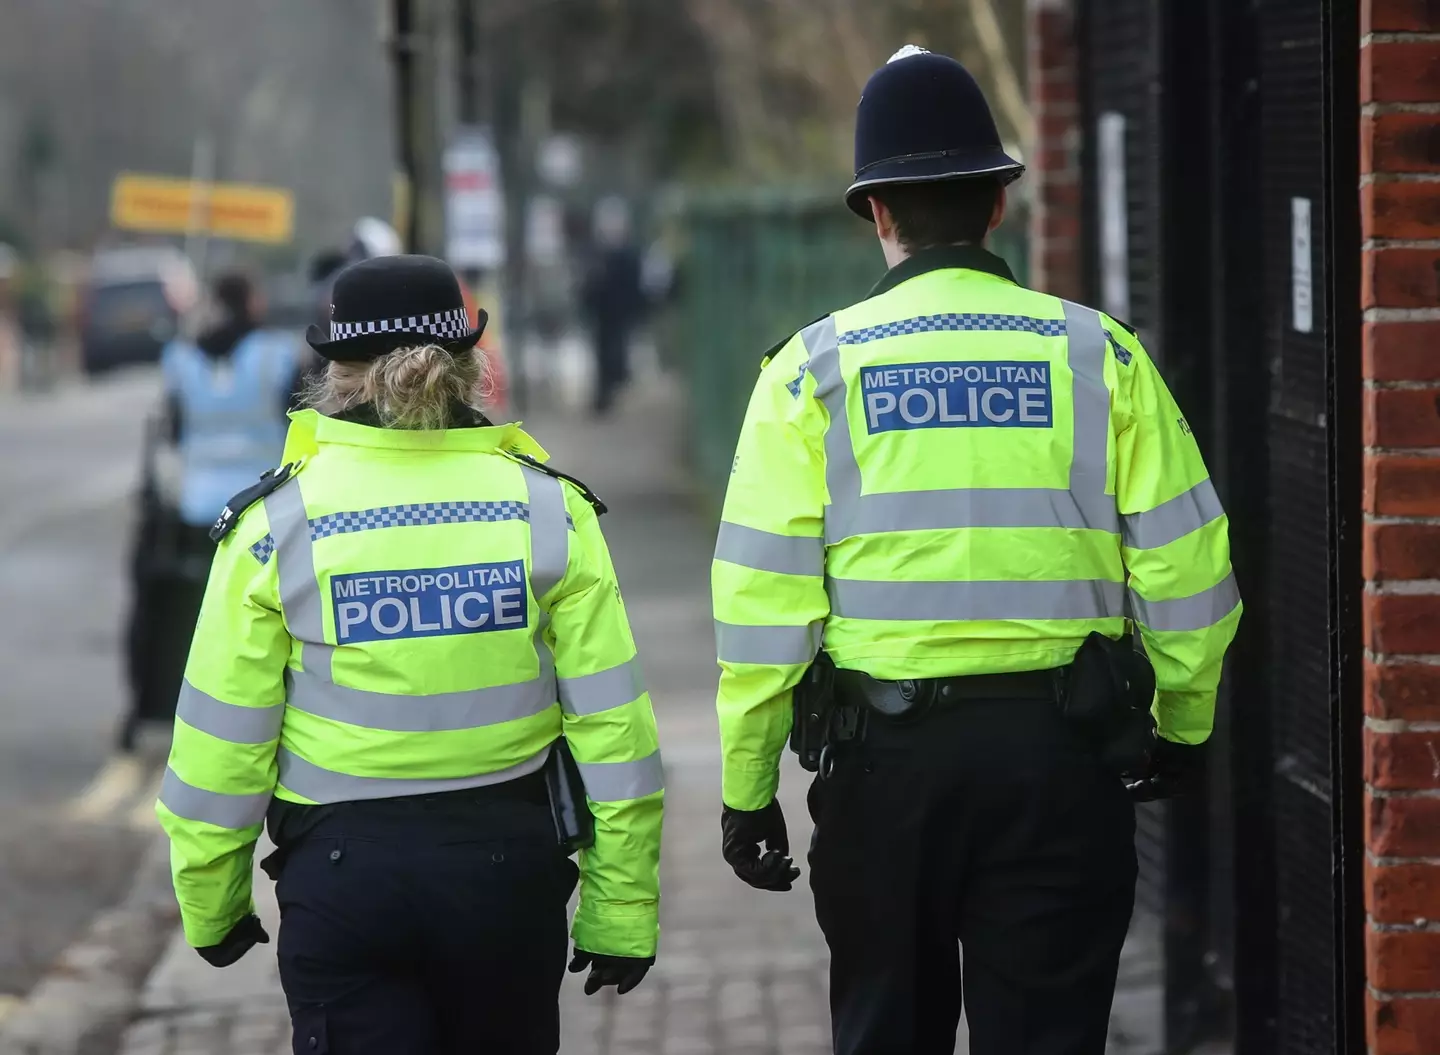 Metropolitan Police confirmed that four arrests had been made in connection with the disorder (Image: Alamy)